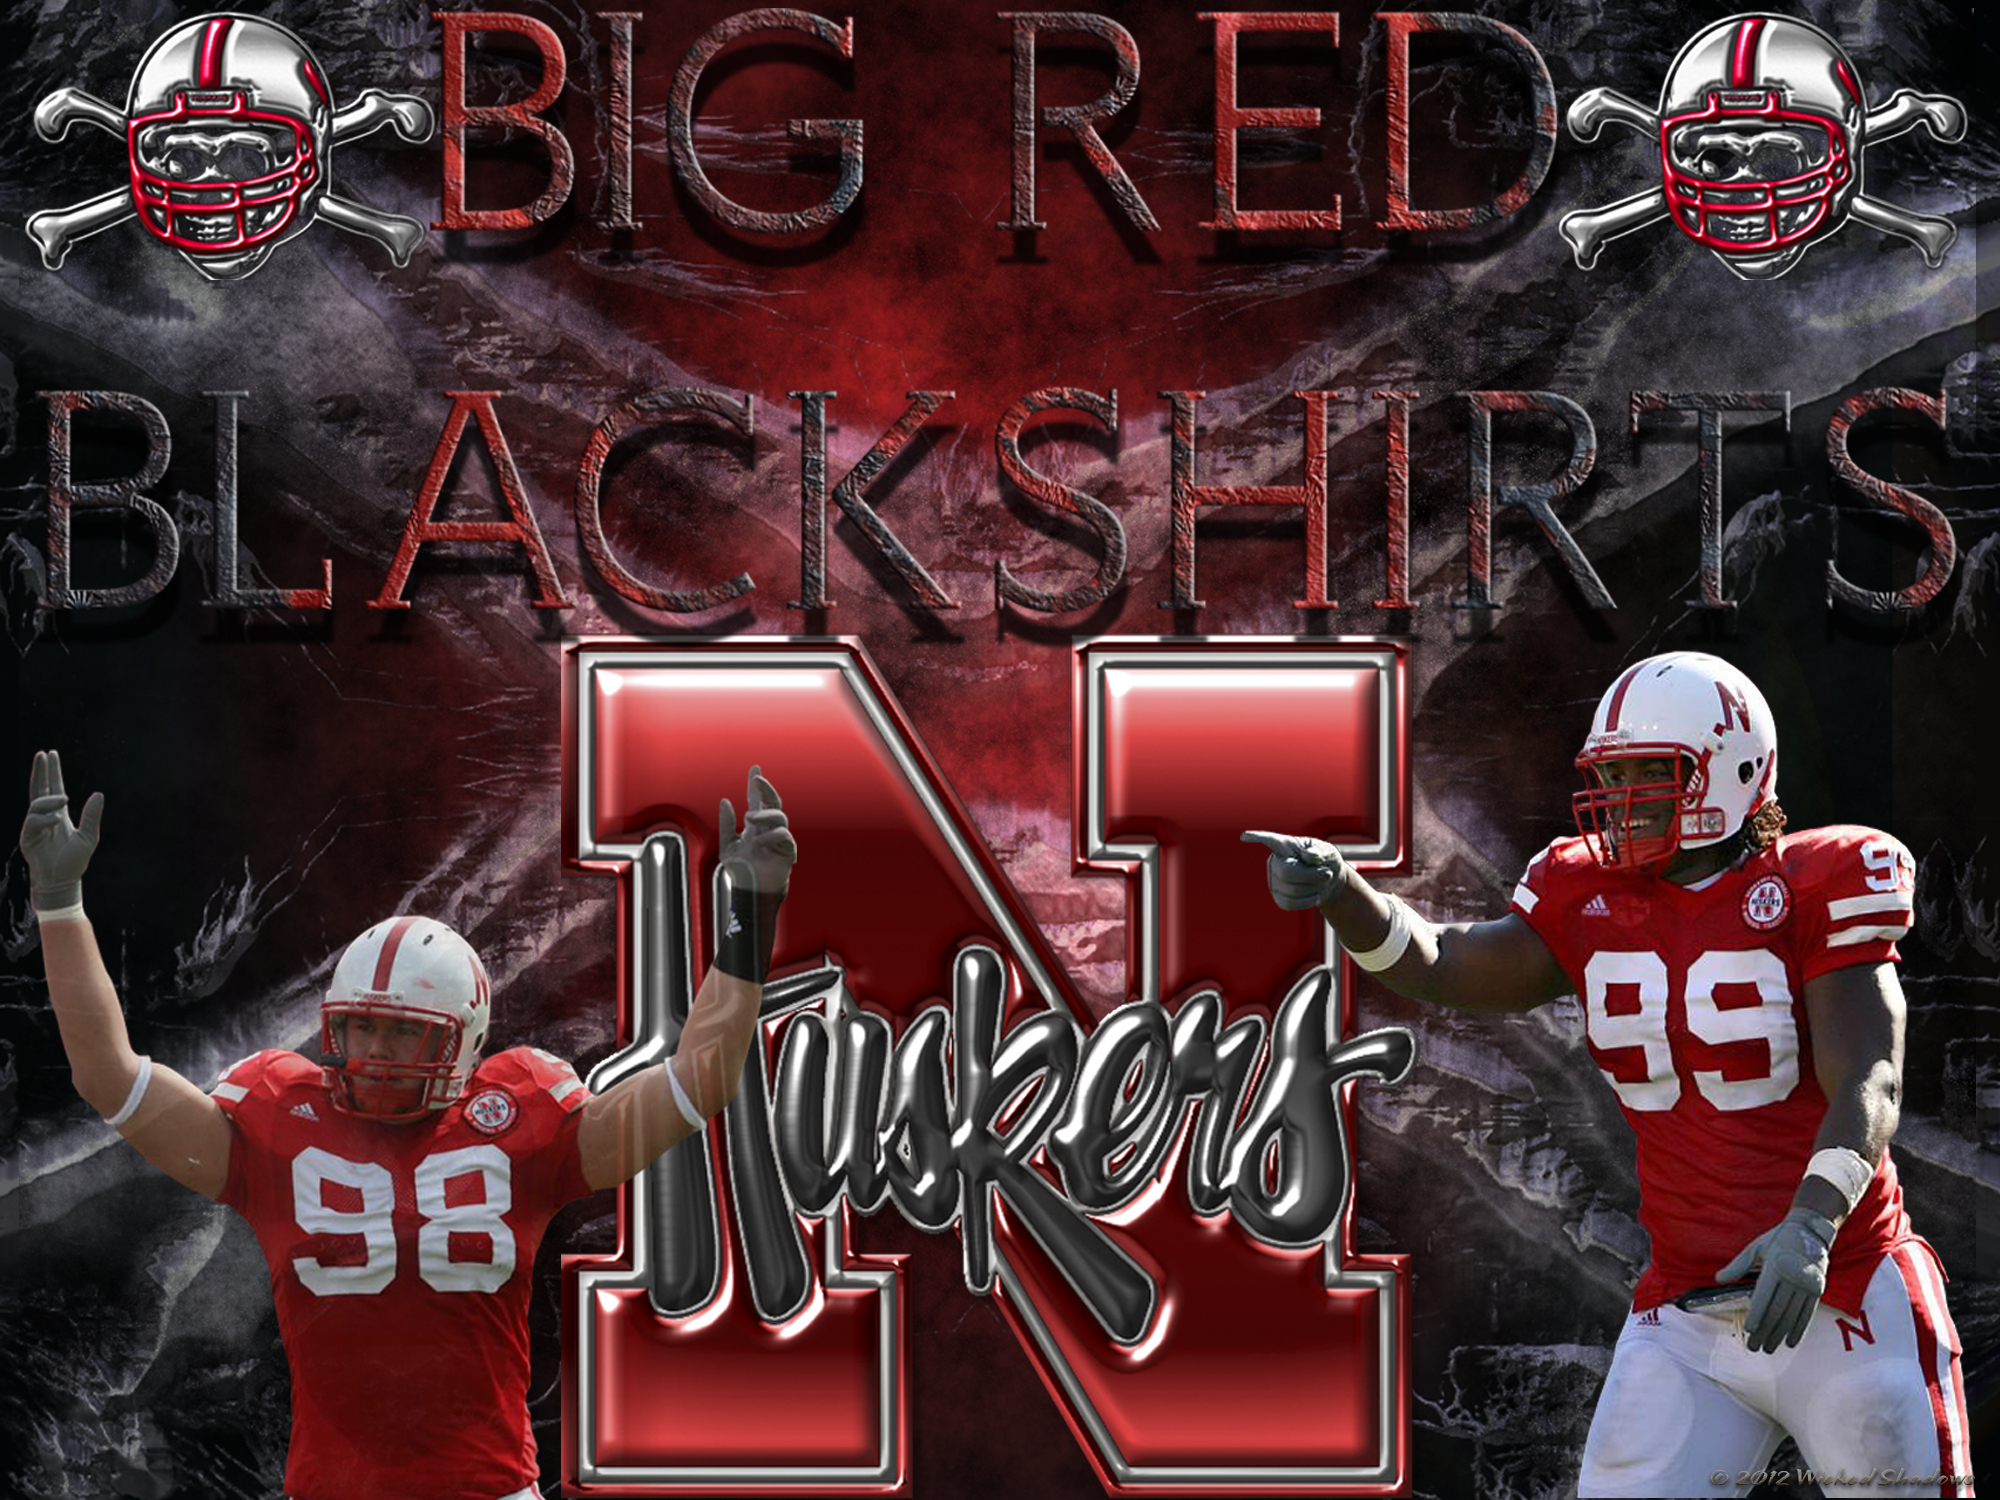 Wallpaper By Wicked Shadows Huskers Big Red Blackshirts